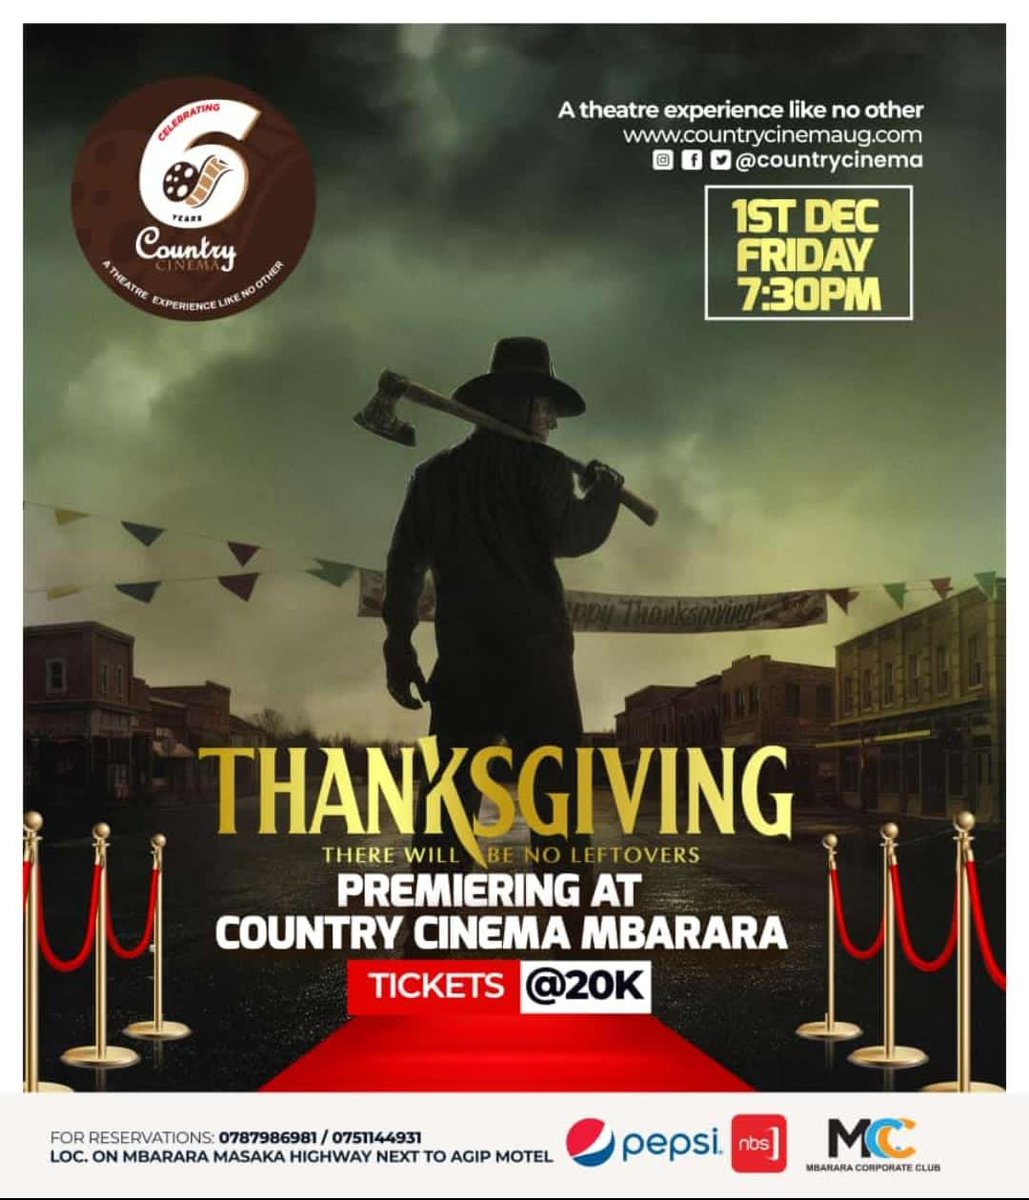 #ThanksGivingMovie is now showing at #CountryCinemaMbarara Come and join us for this cinematic experience proudly sponsored by @PepsiUganda
@CountryCinemas A Theatre Experience Like No Other